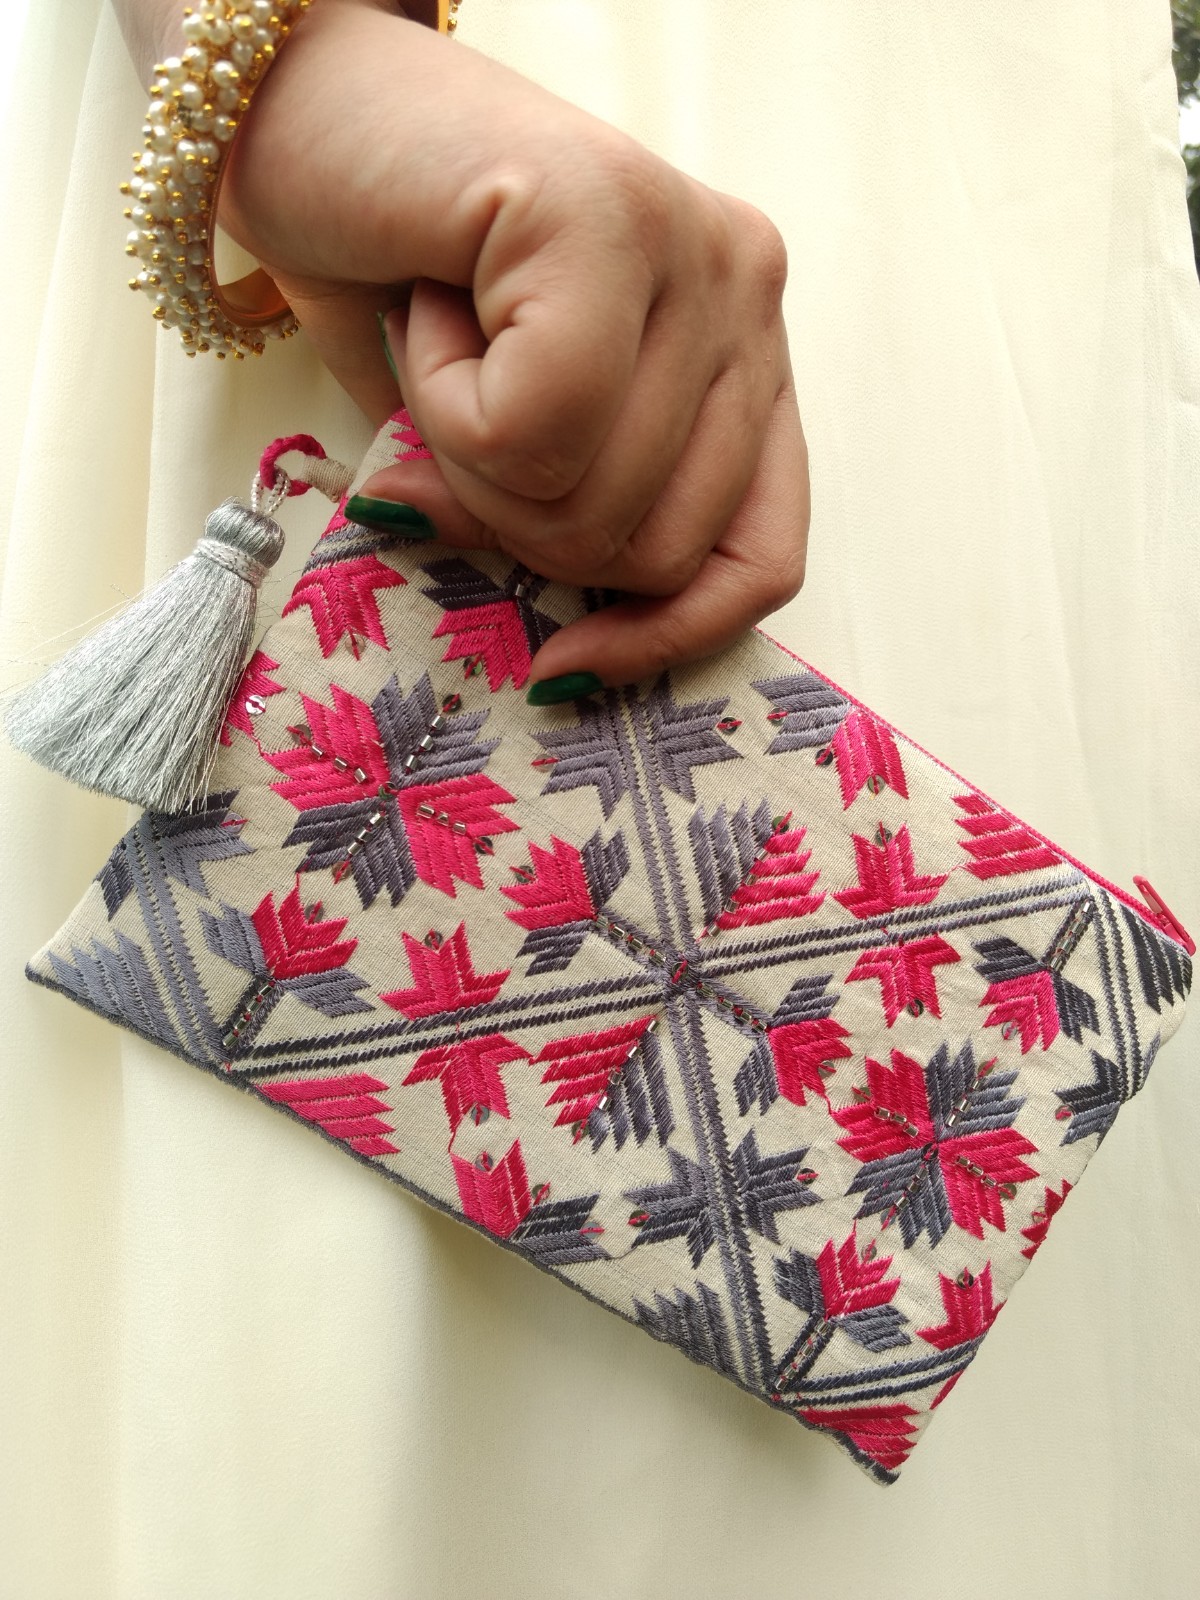 Asees By Aakriti Has a Unique Collection Of Phulkari Accessories